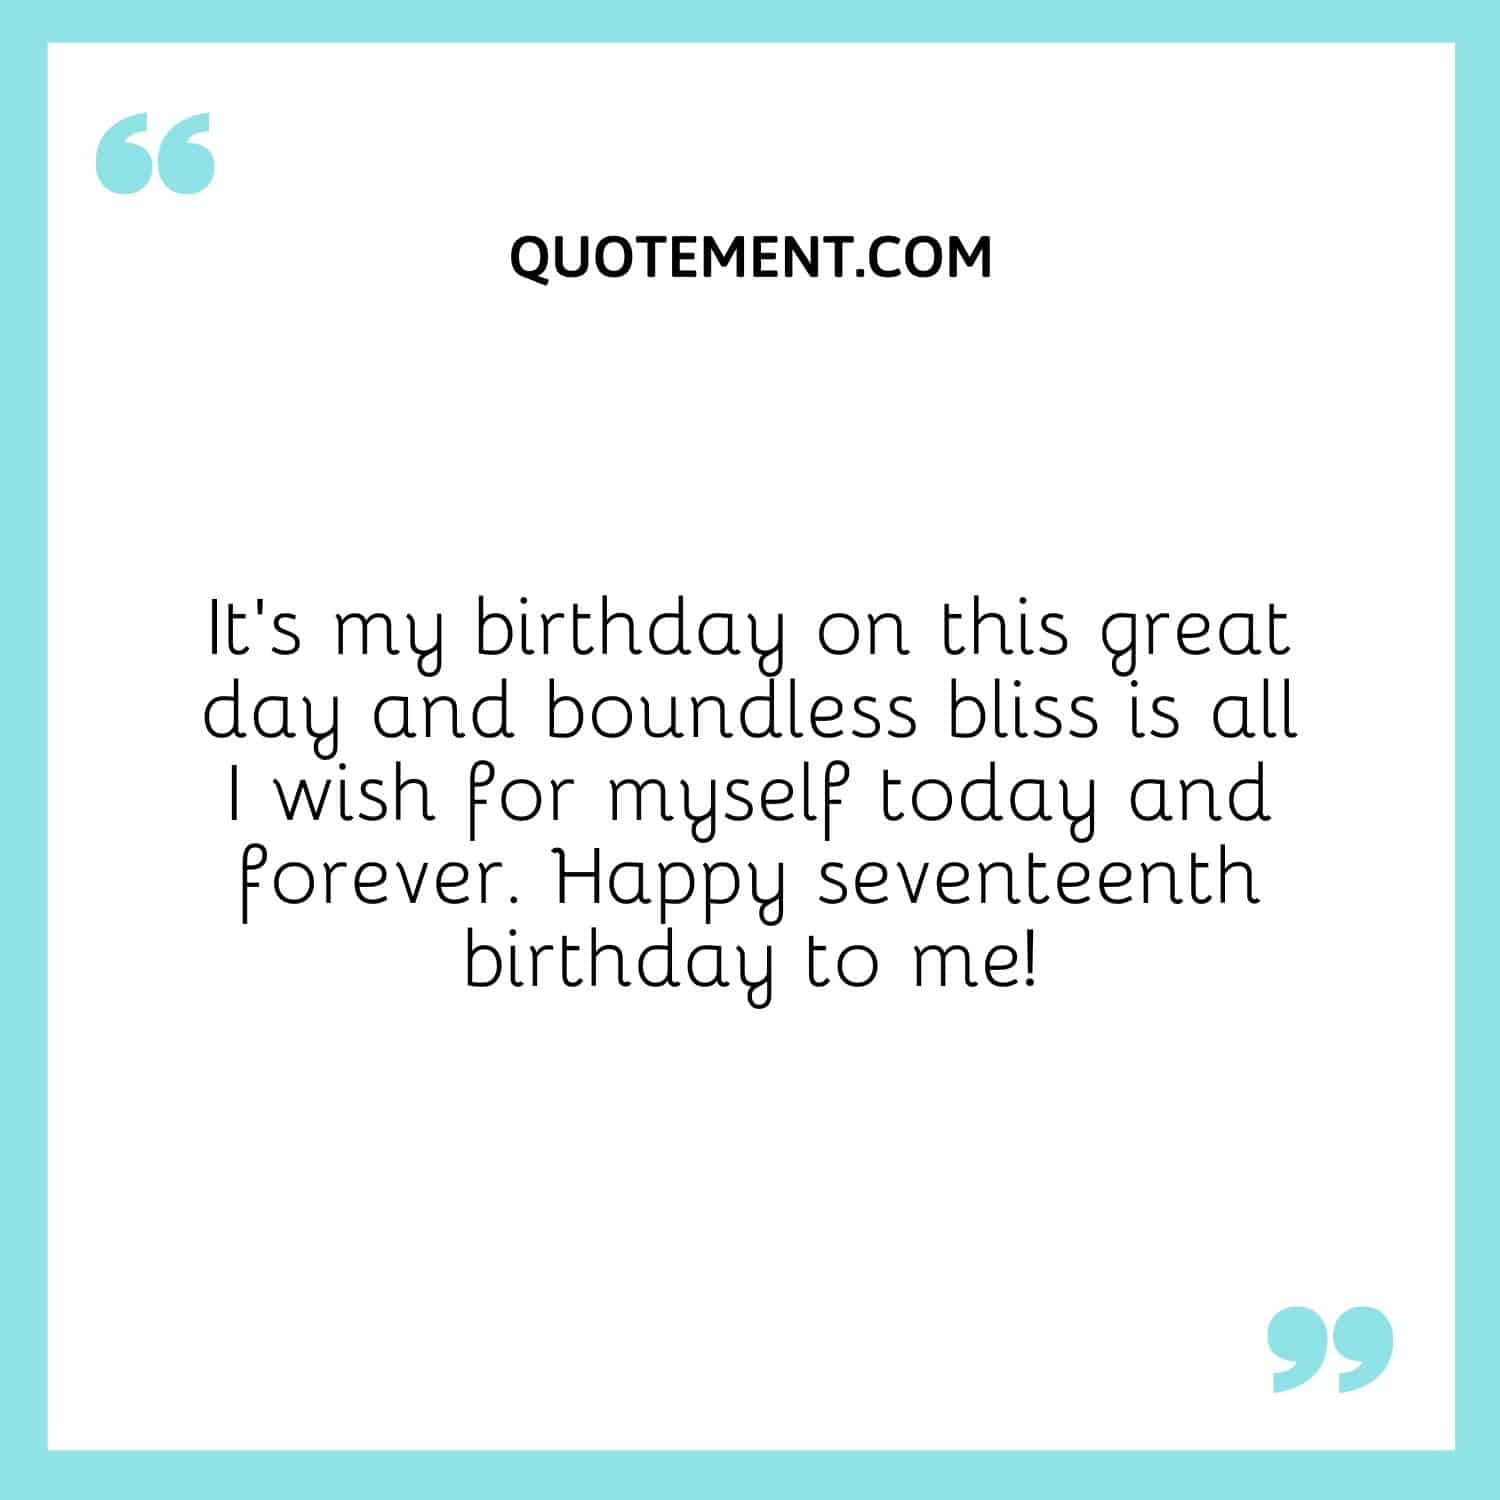 It’s my birthday on this great day and boundless bliss is all I wish for myself today and forever.